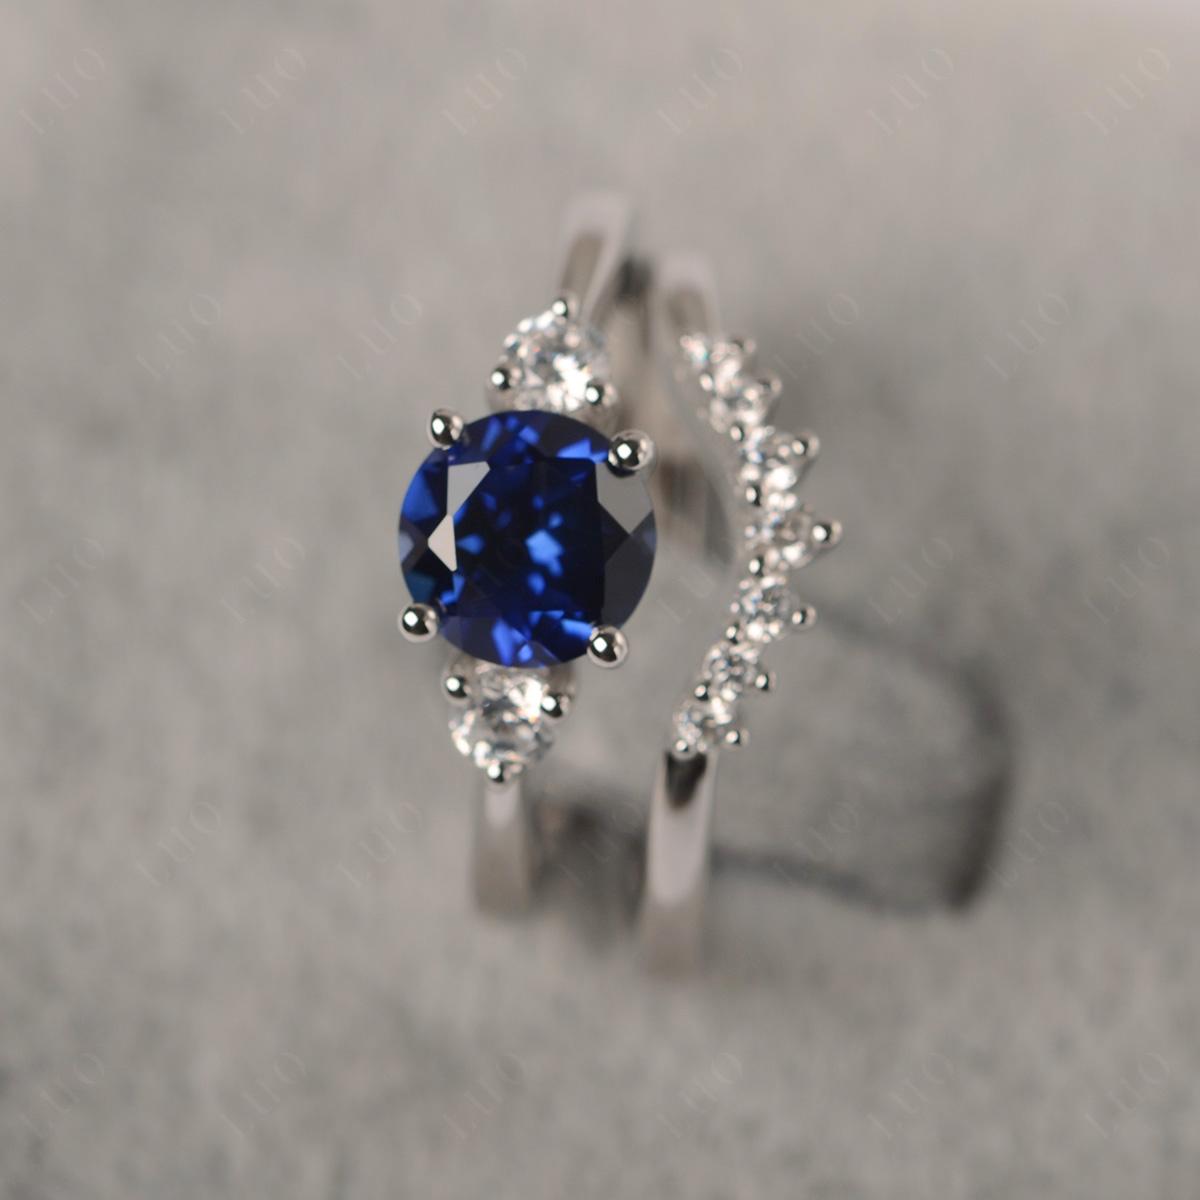 Sapphire Ring Bridal Set Engagement Ring - LUO Jewelry